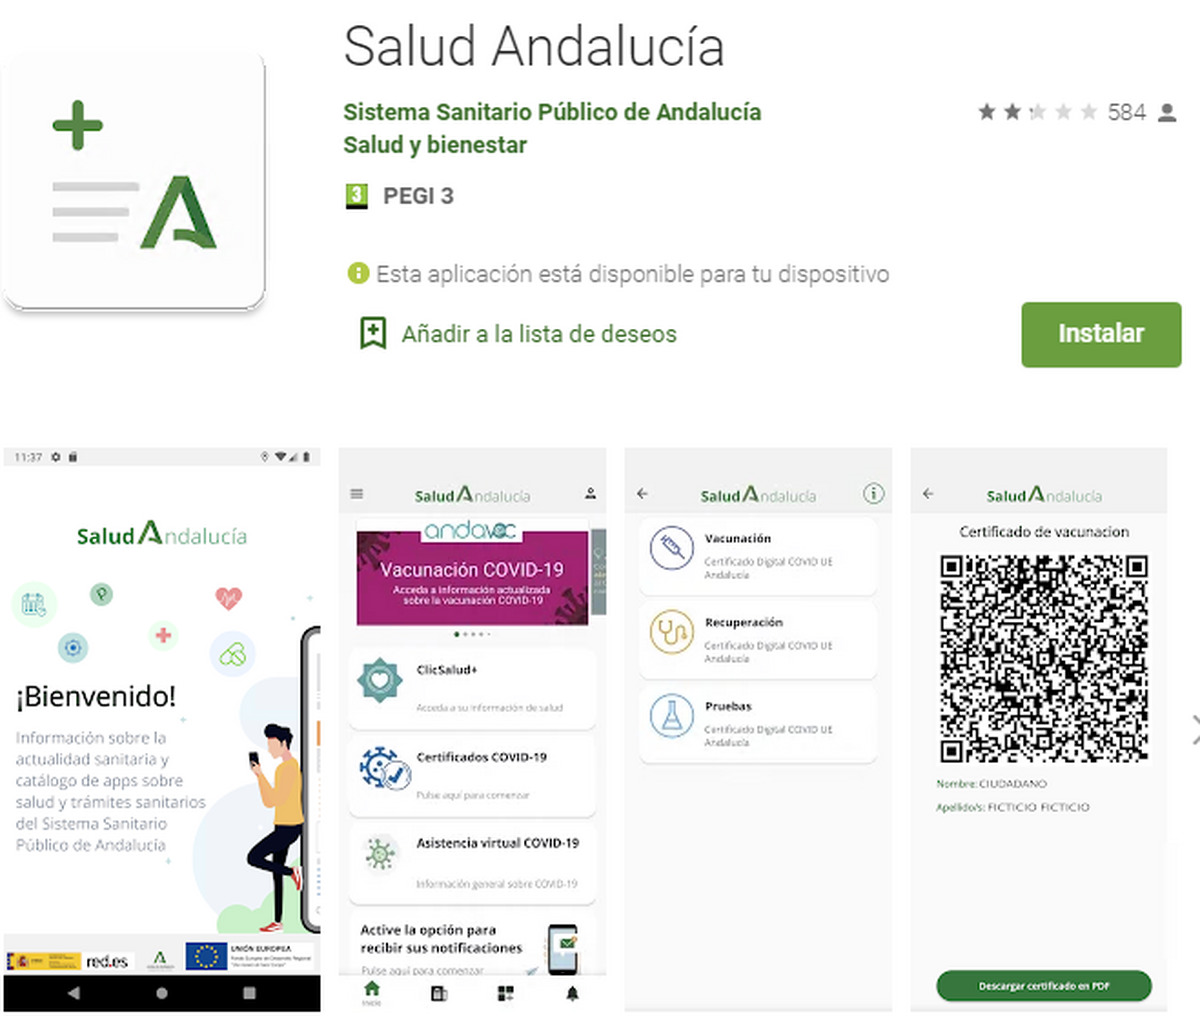 app-salud-andalucia-android-1581752033-139758241-1200×1031-1